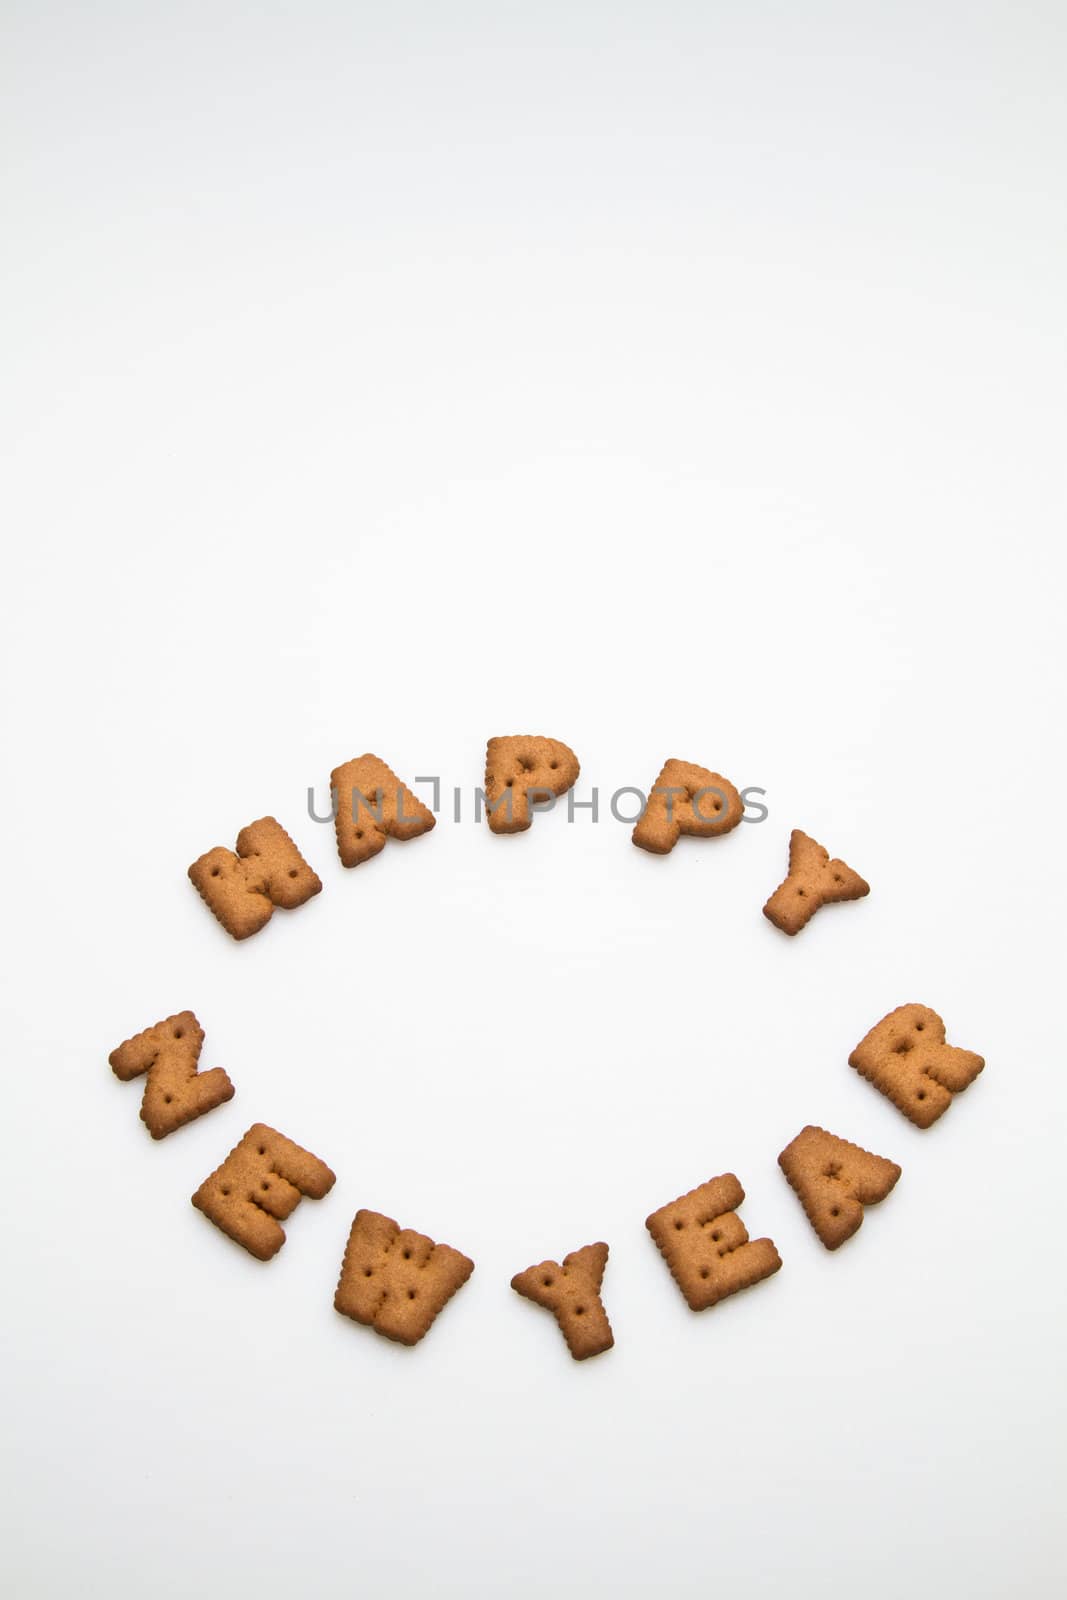 Happy New Year greeting words made by brown biscuits in lower center of white surface in portrait orientation for background use